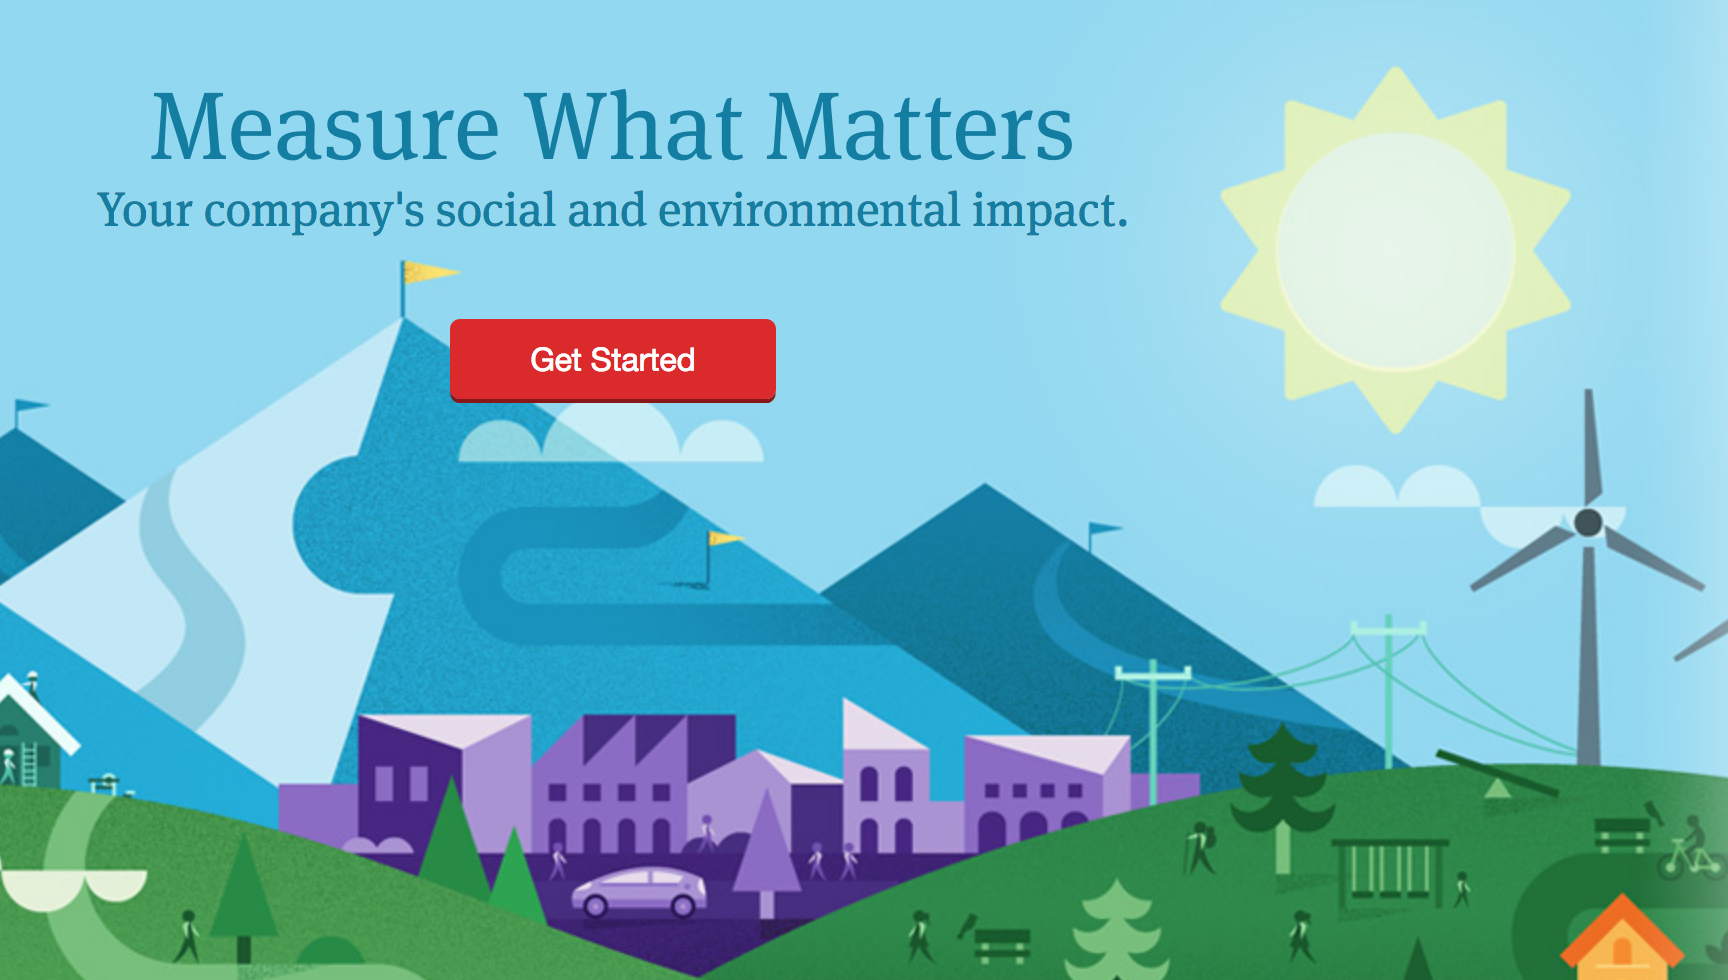 Measure What Matters: Your company's social and environmental impact.